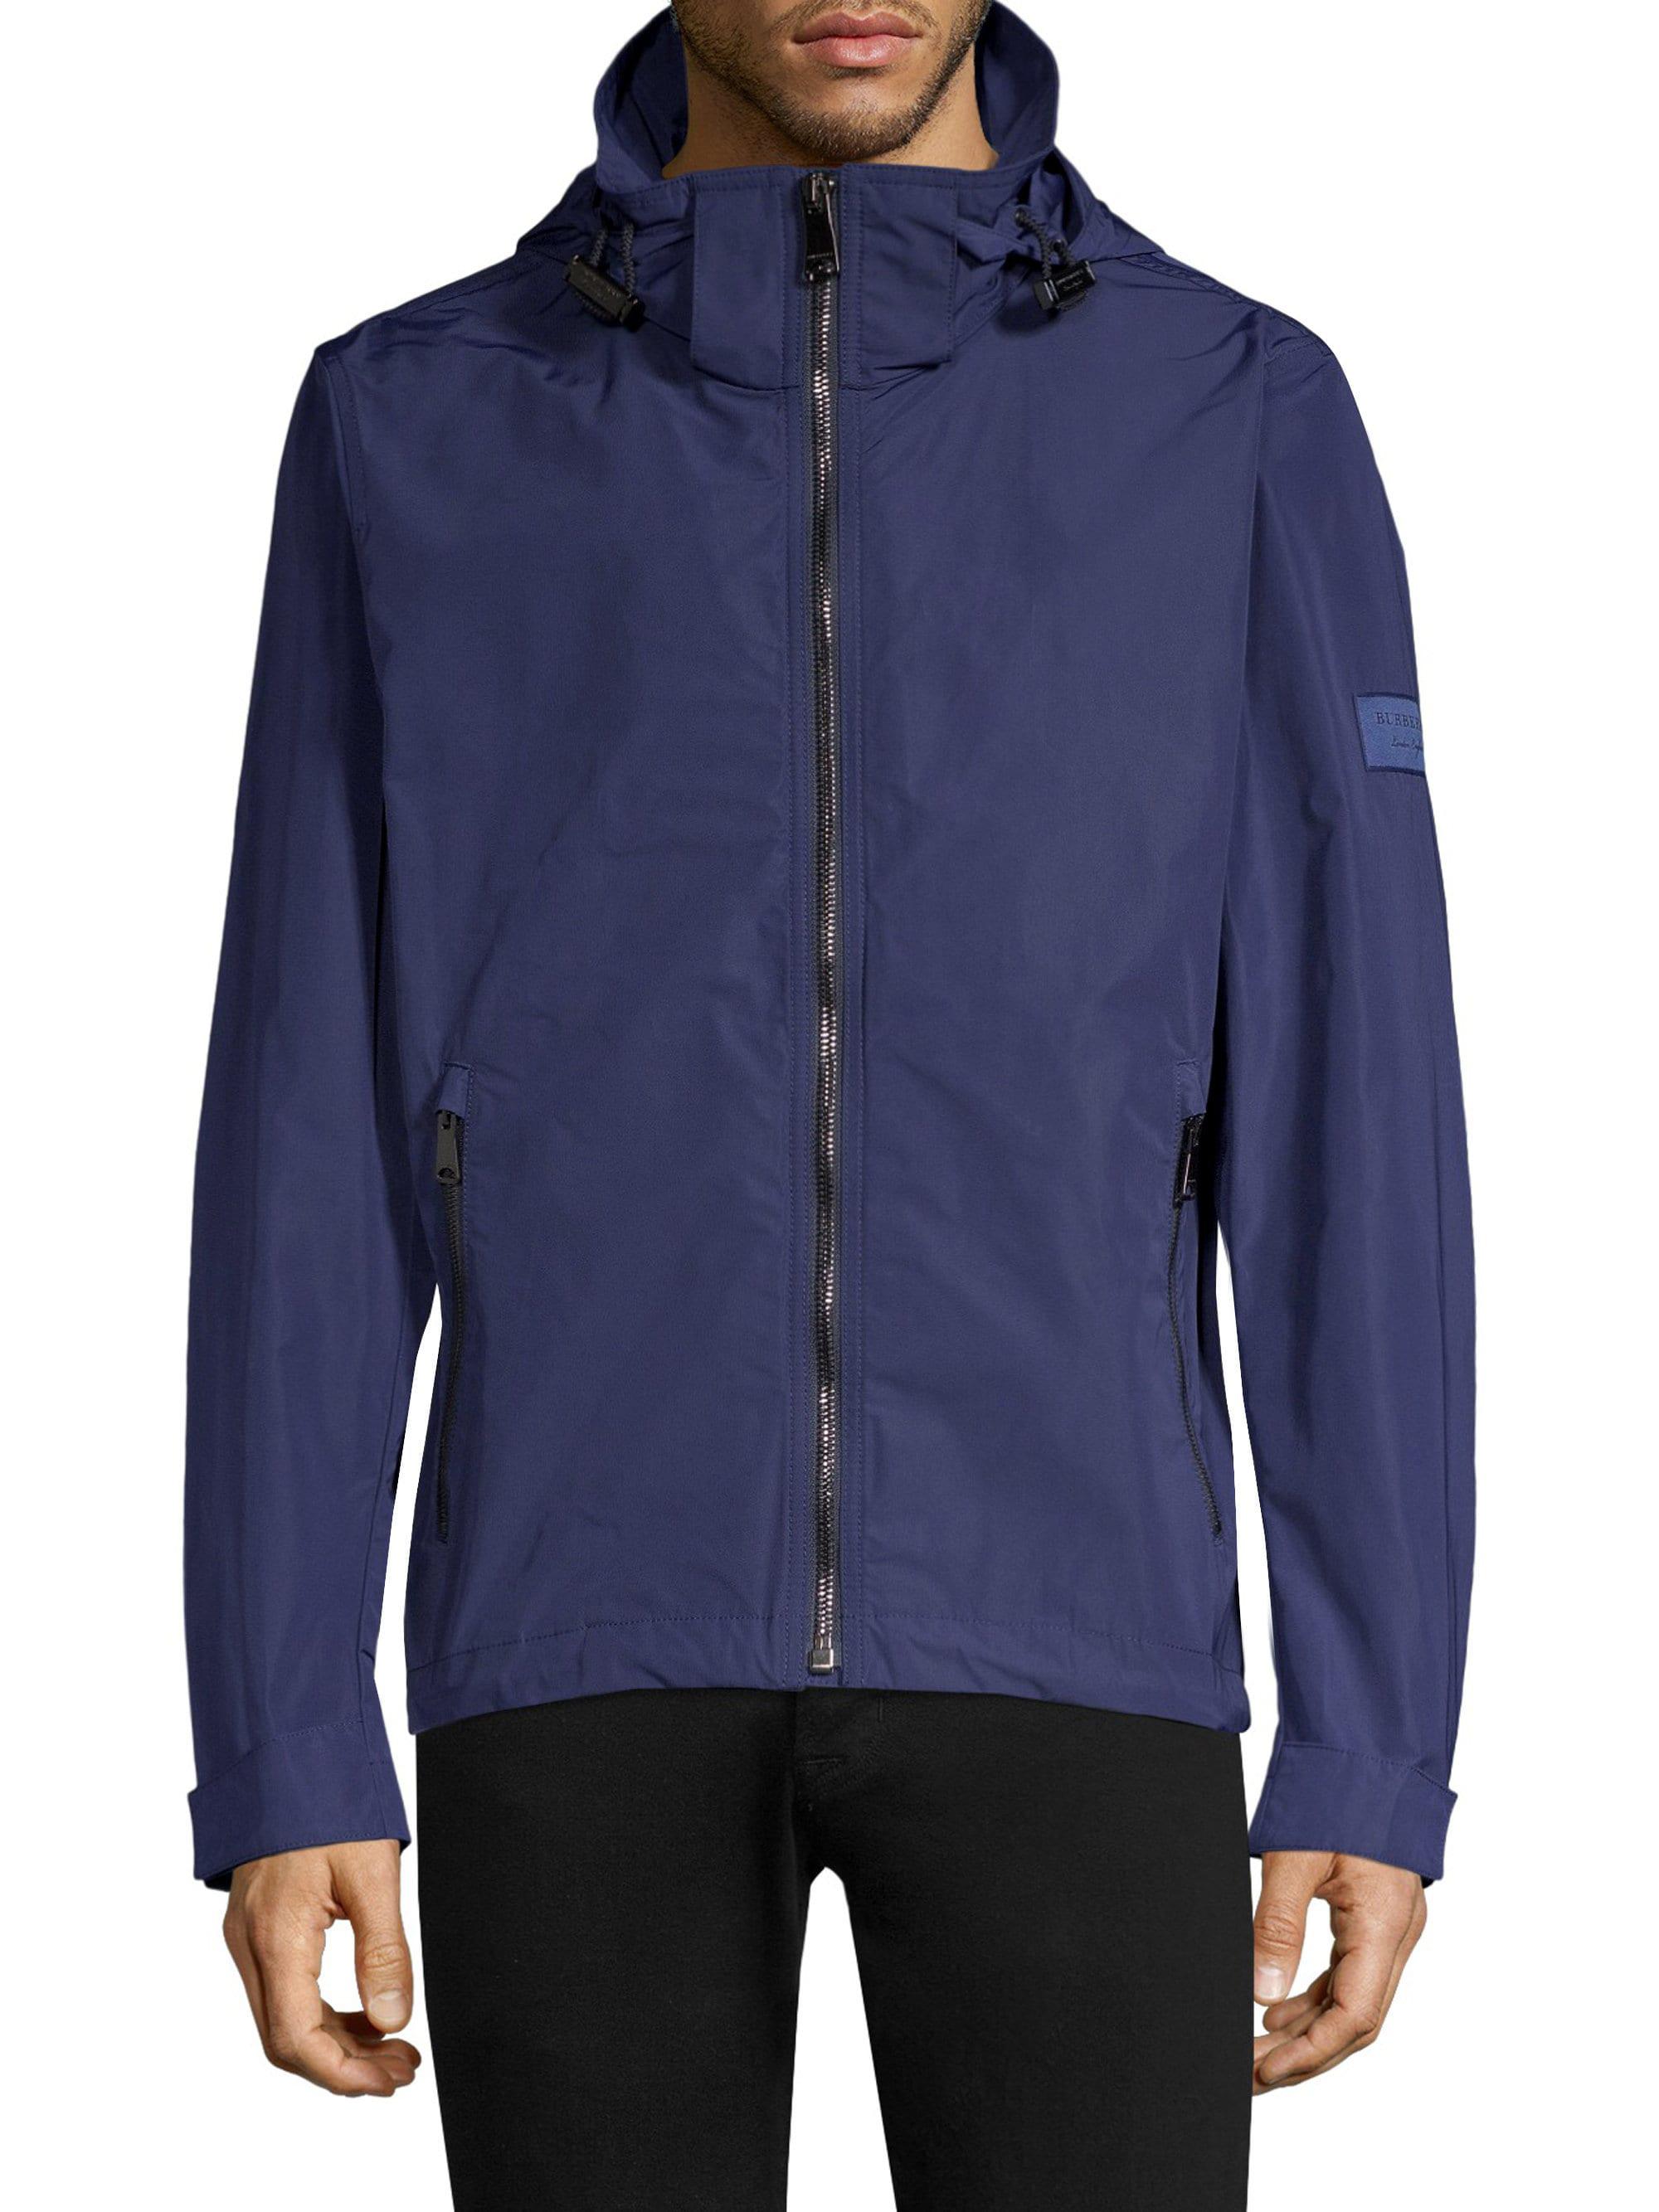 Burberry Hedley Hooded Zip-up Jacket in 